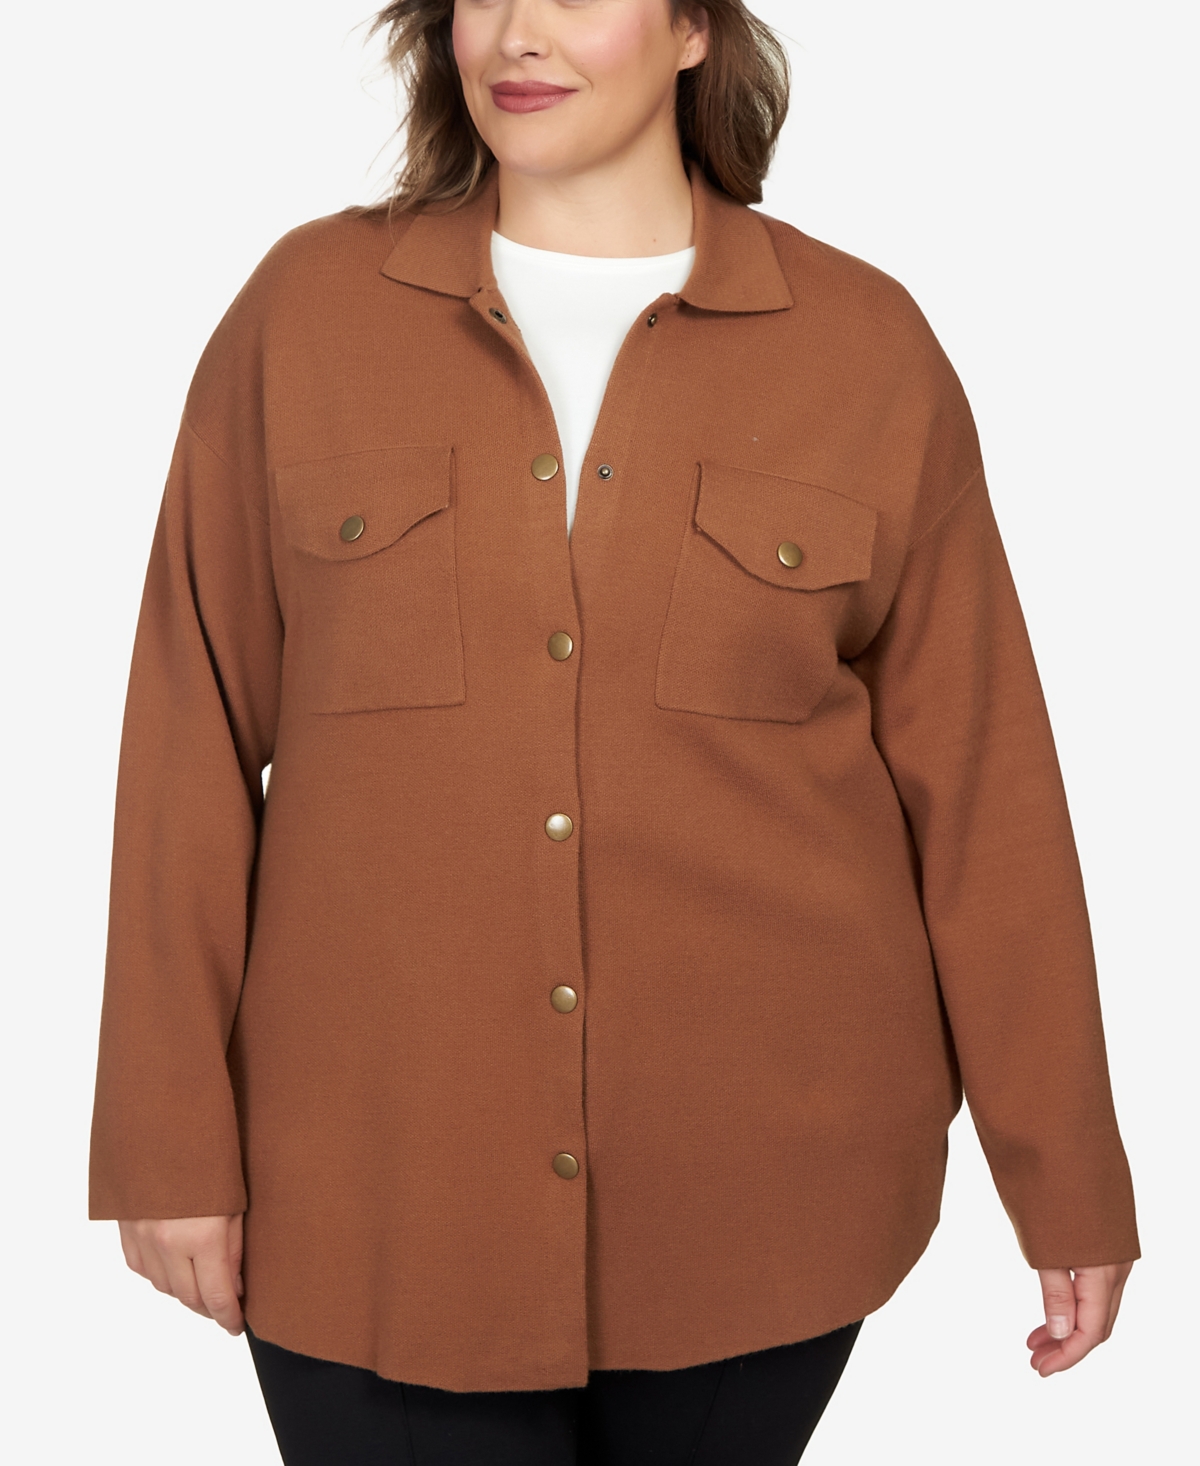 Ruby Rd. Plus Size Solid Shacket Sweater In Chestnut